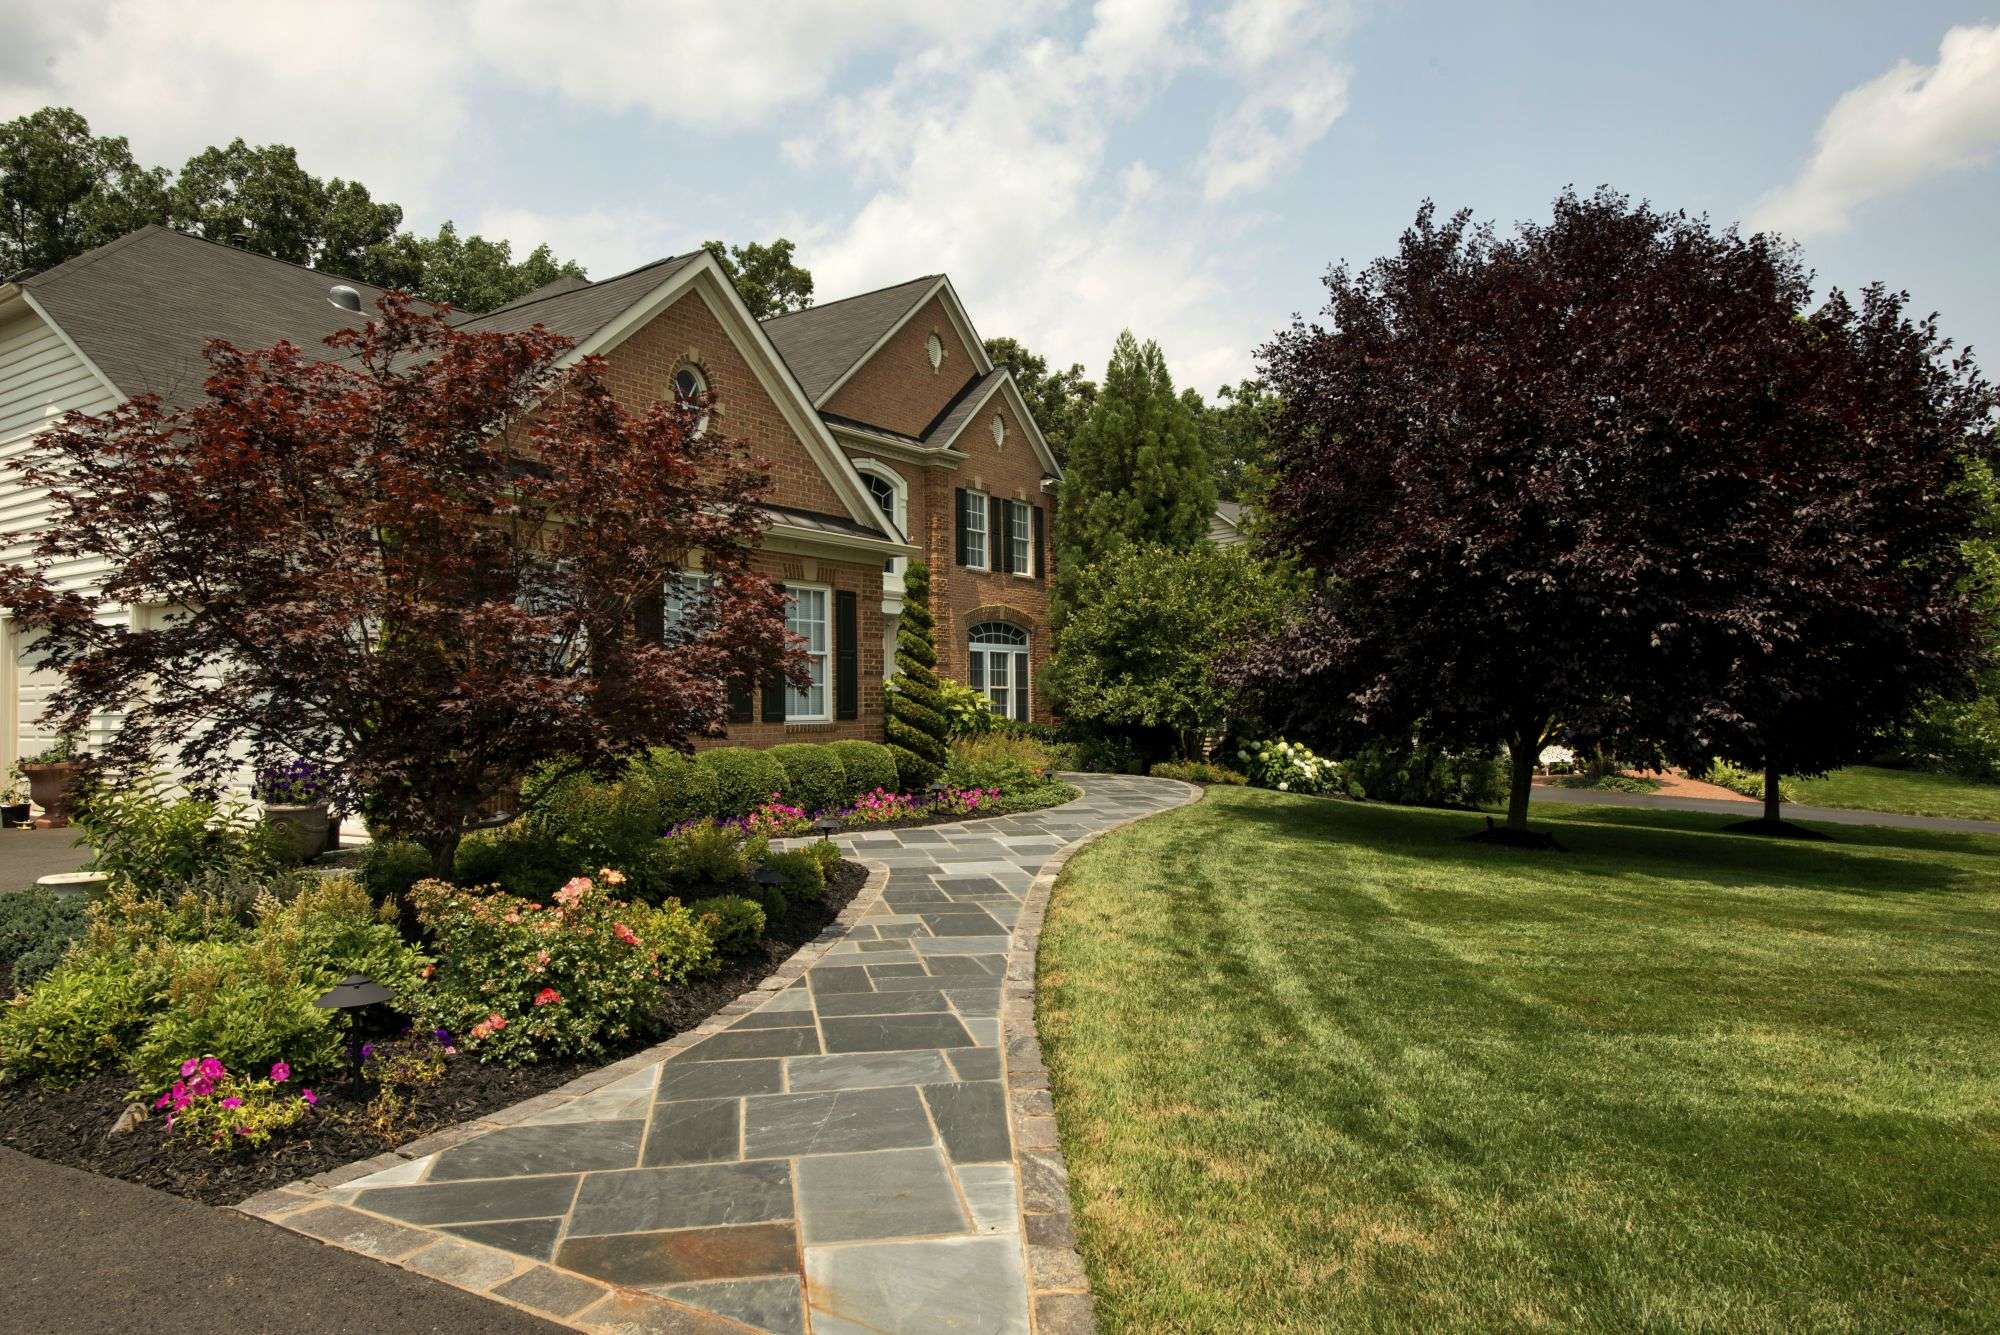 Stone walkway design and landscaping in front of house